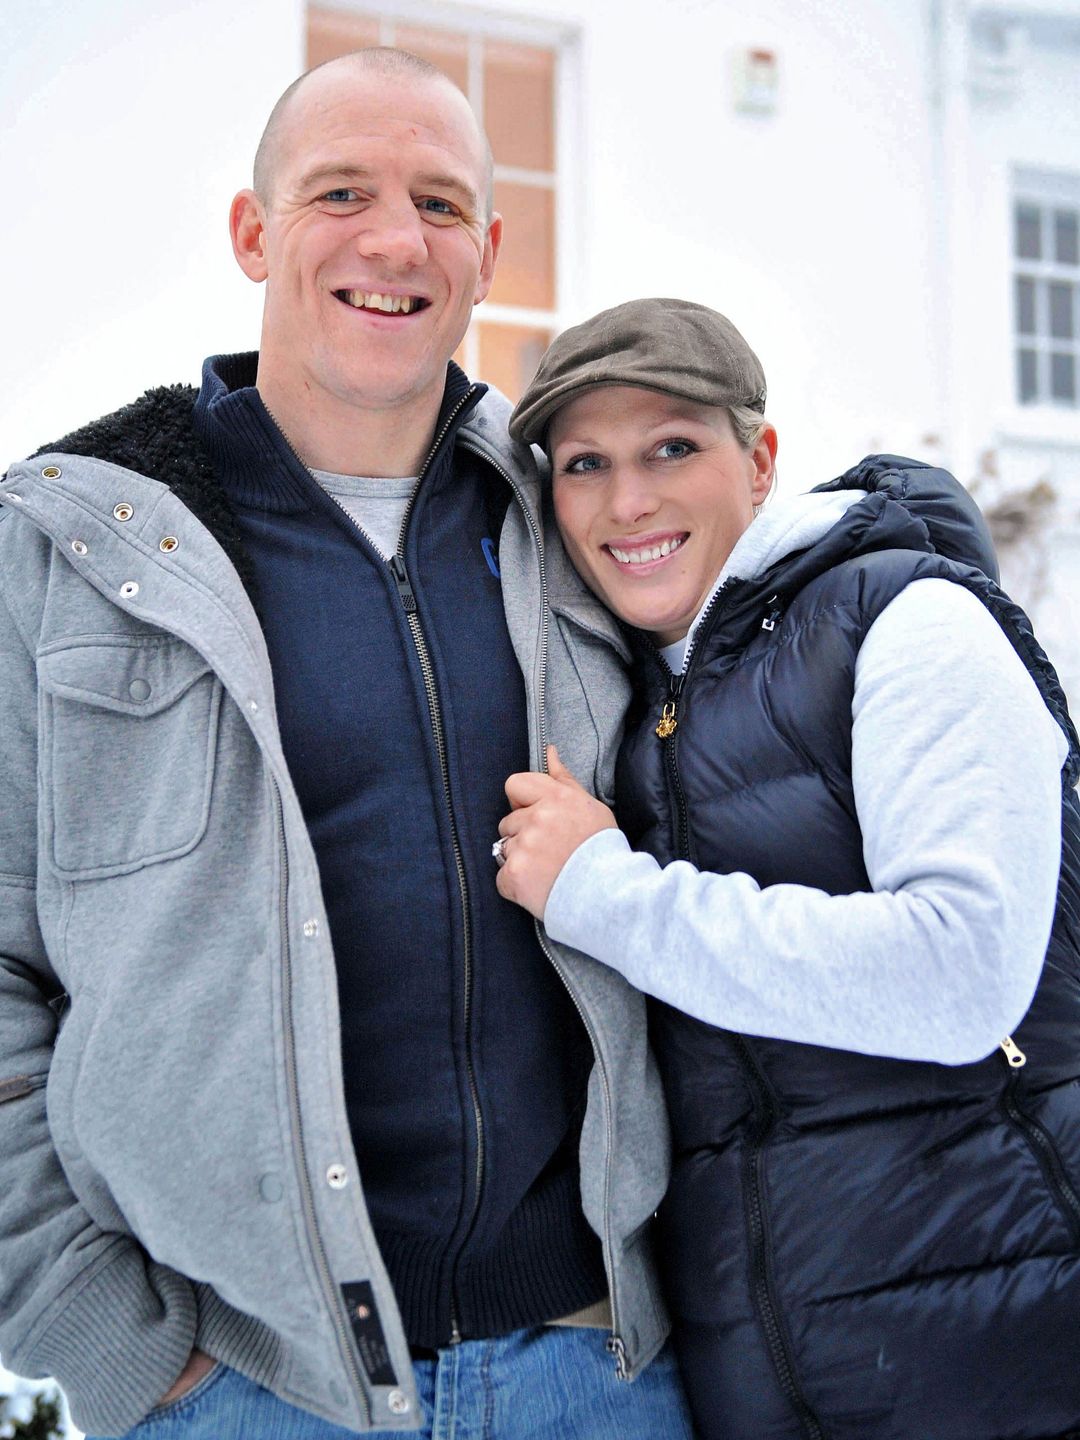 Zara Phillips, daughter of Princess Anne, and grand-daughter of Britain's Queen Elizabeth II, poses for a photograph with her fiance, England rugby player Mike Tindall, after the announcement of their engagement, at their home in Gloucestershire, south west England on December 21, 2010